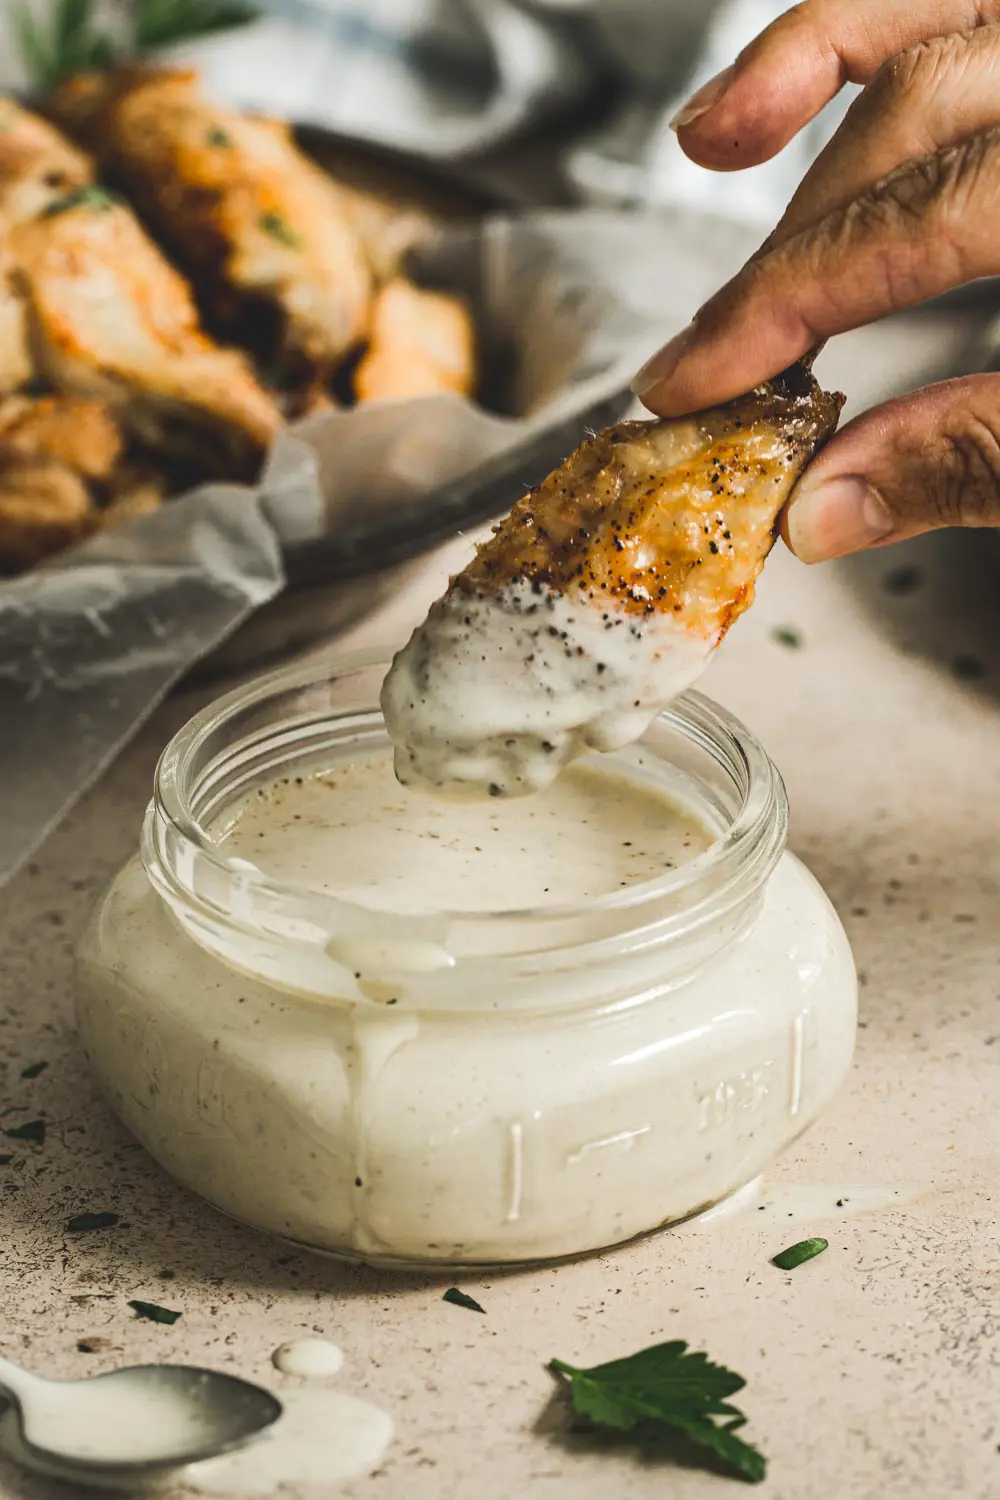 Chicken wing dipping into Alabama white sauce.